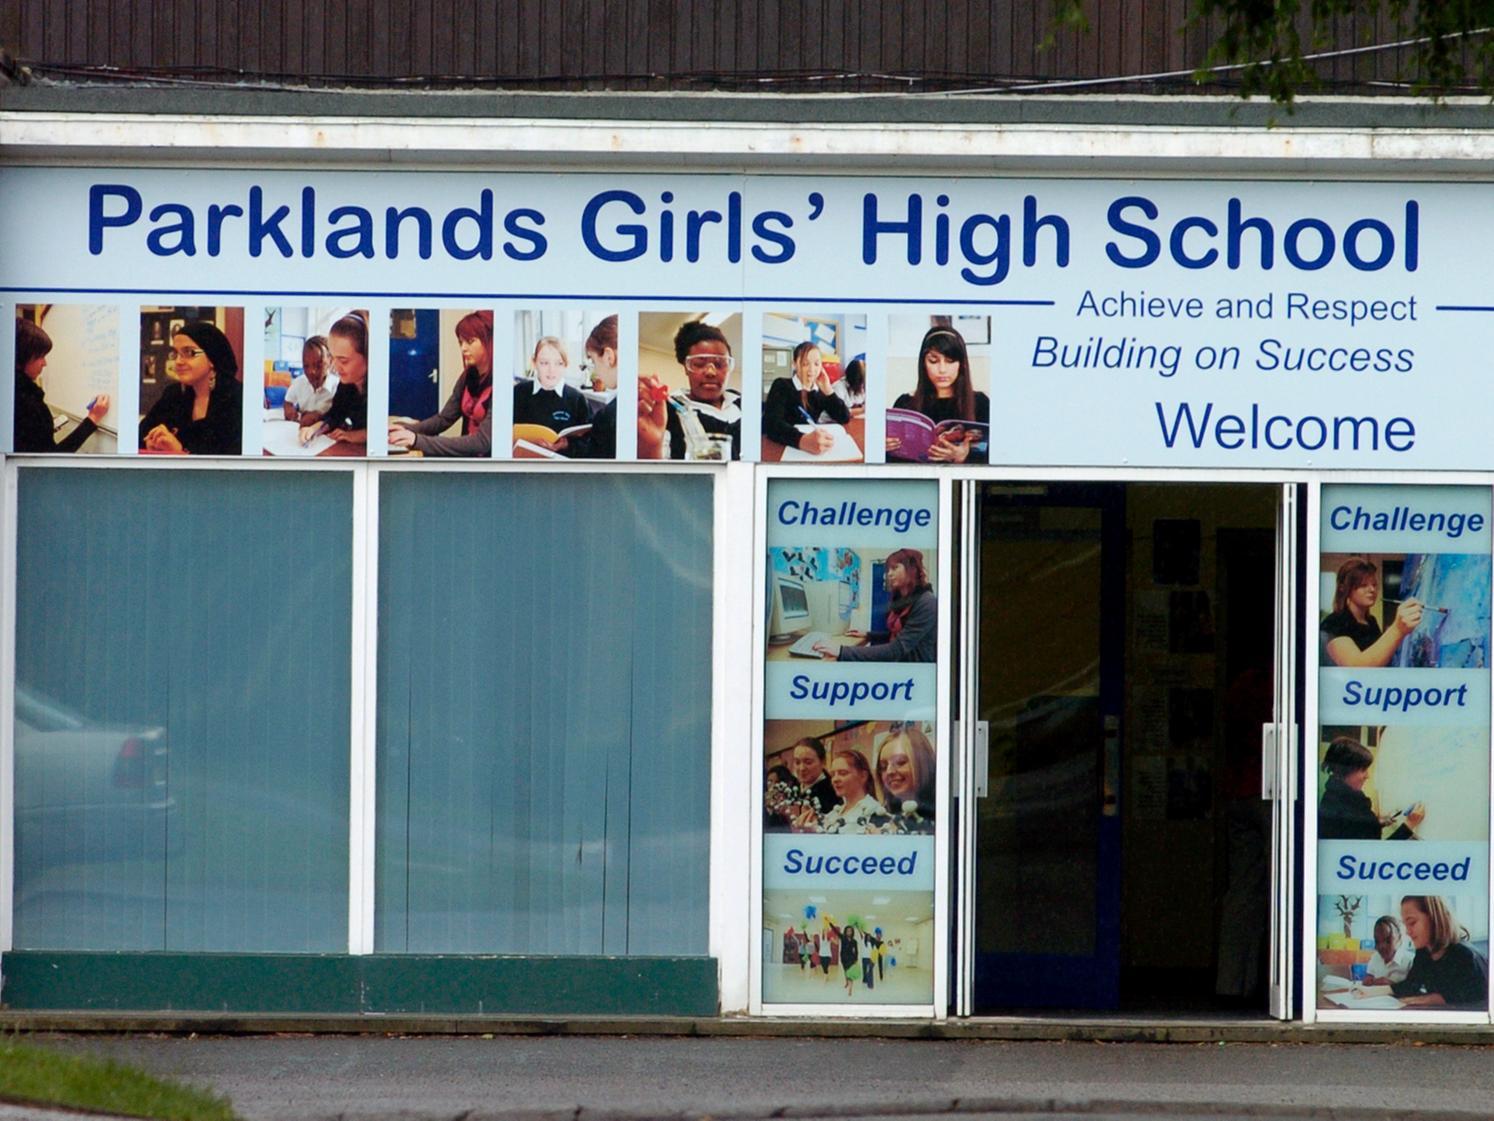 Has this gallery brought back memories of your time at Parklands Girls' High School? Share them with Andrew Hutchinson via email: andrew.hutchinson@jpress.co.uk or tweet him @AndyHutchYPN